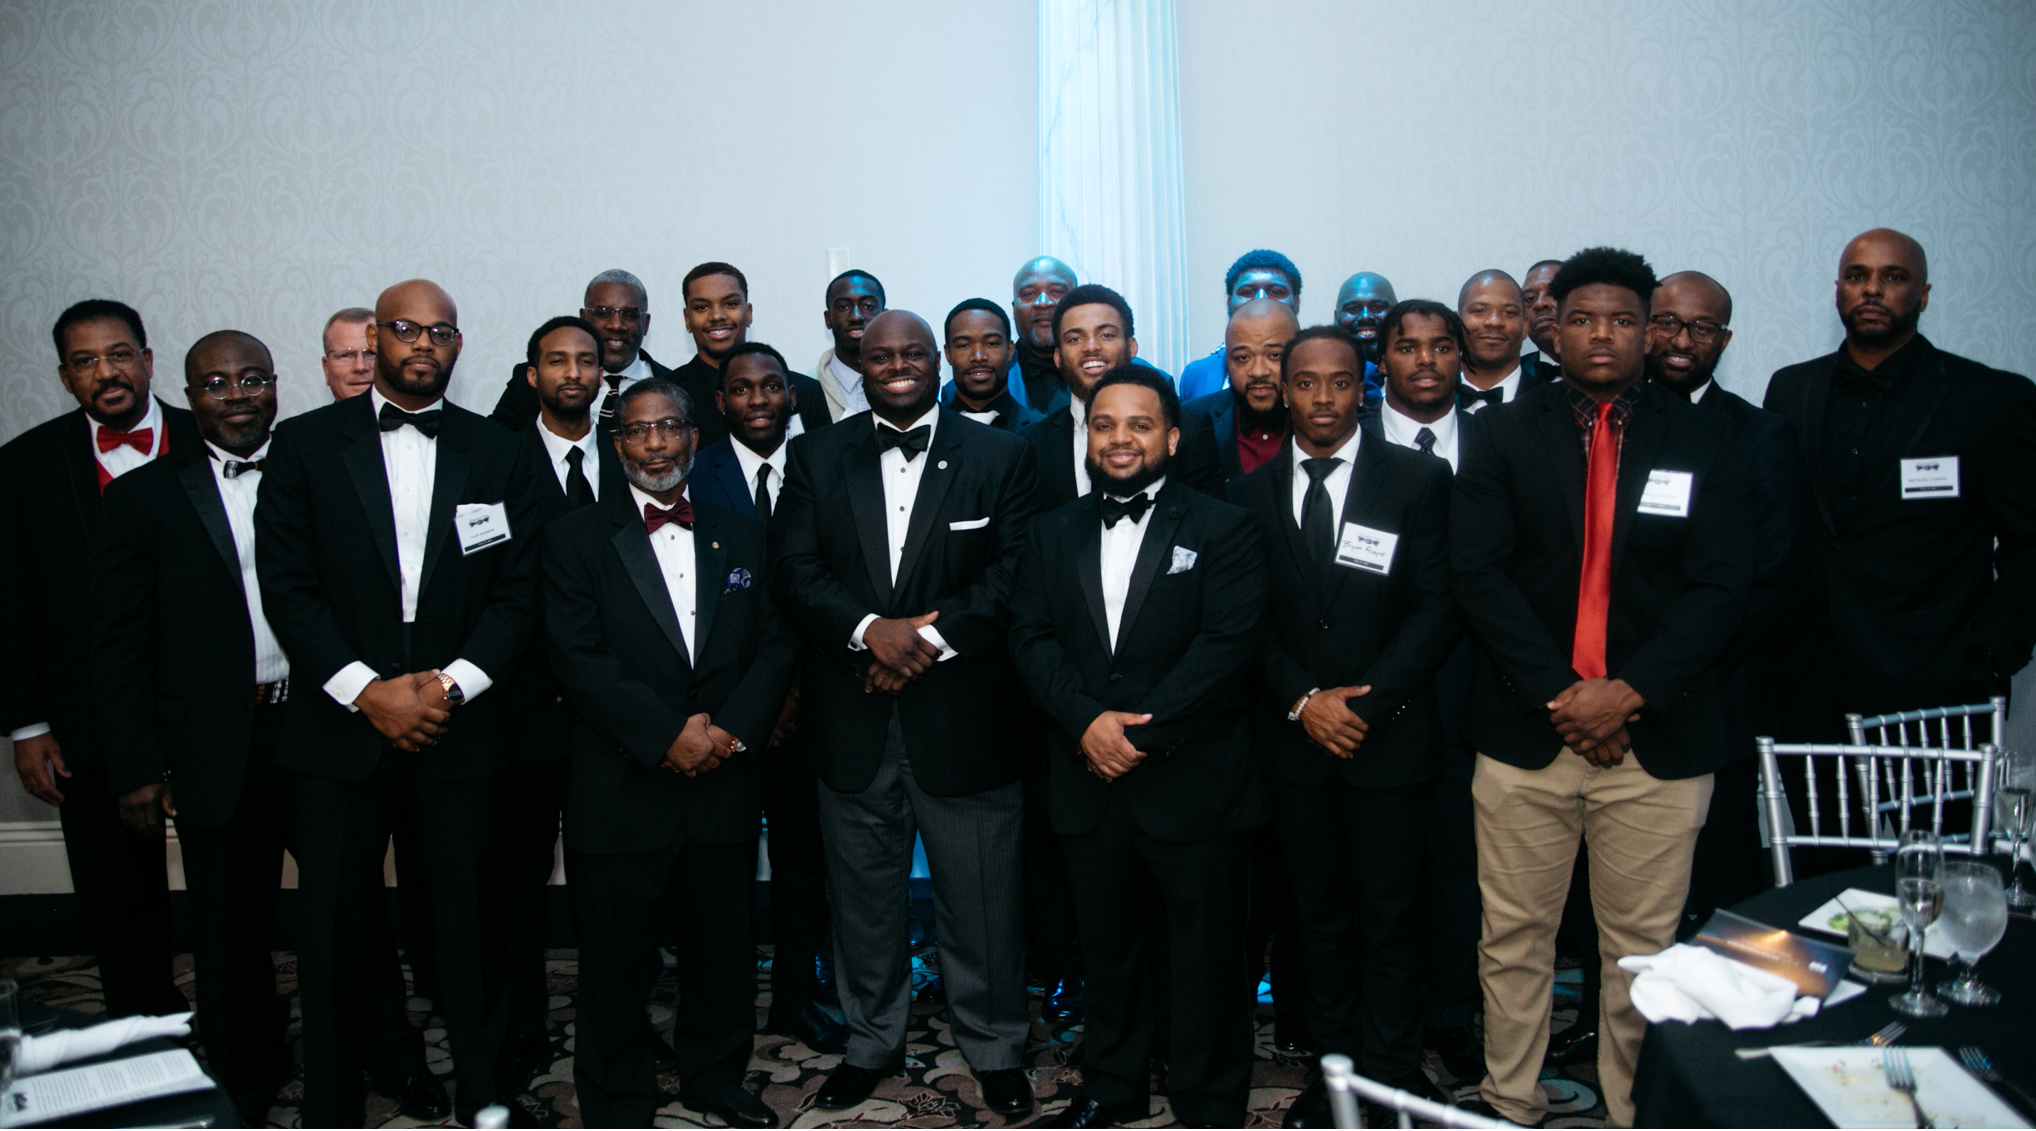 Provost Tony Allen led a University contingent of over 30 administrators, faculty, staff, and students to the 22nd Annual Ebony Tie Affair.